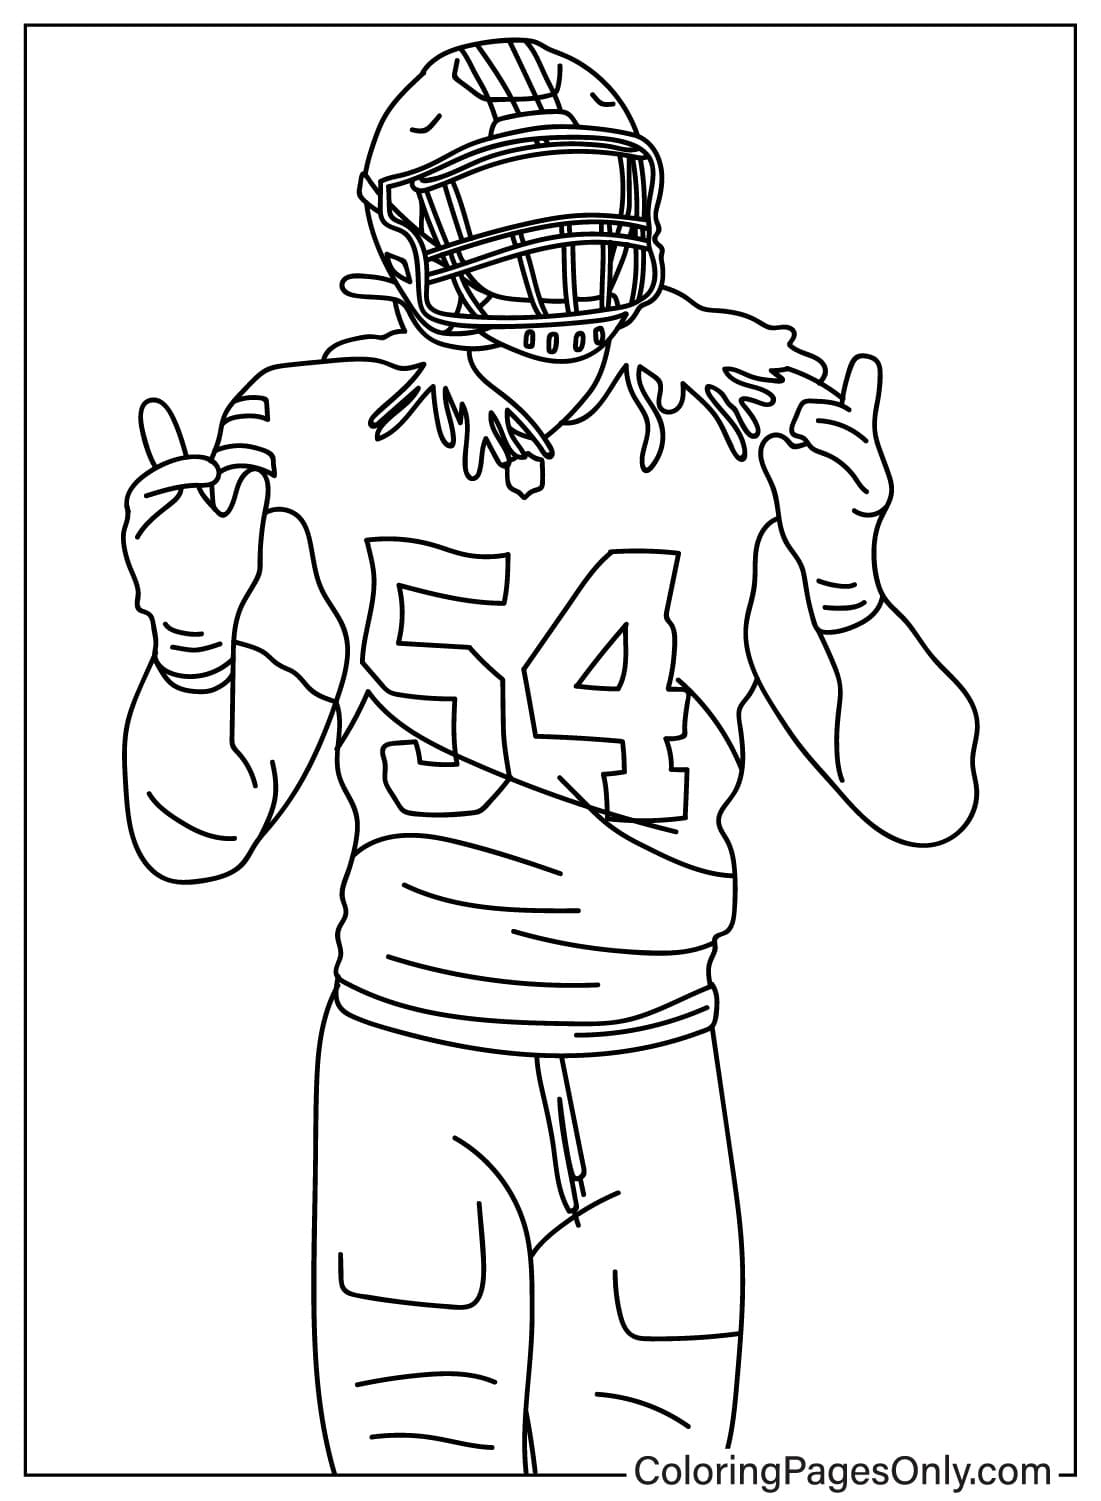 Fred Warner Coloring Page from San Francisco 49ers